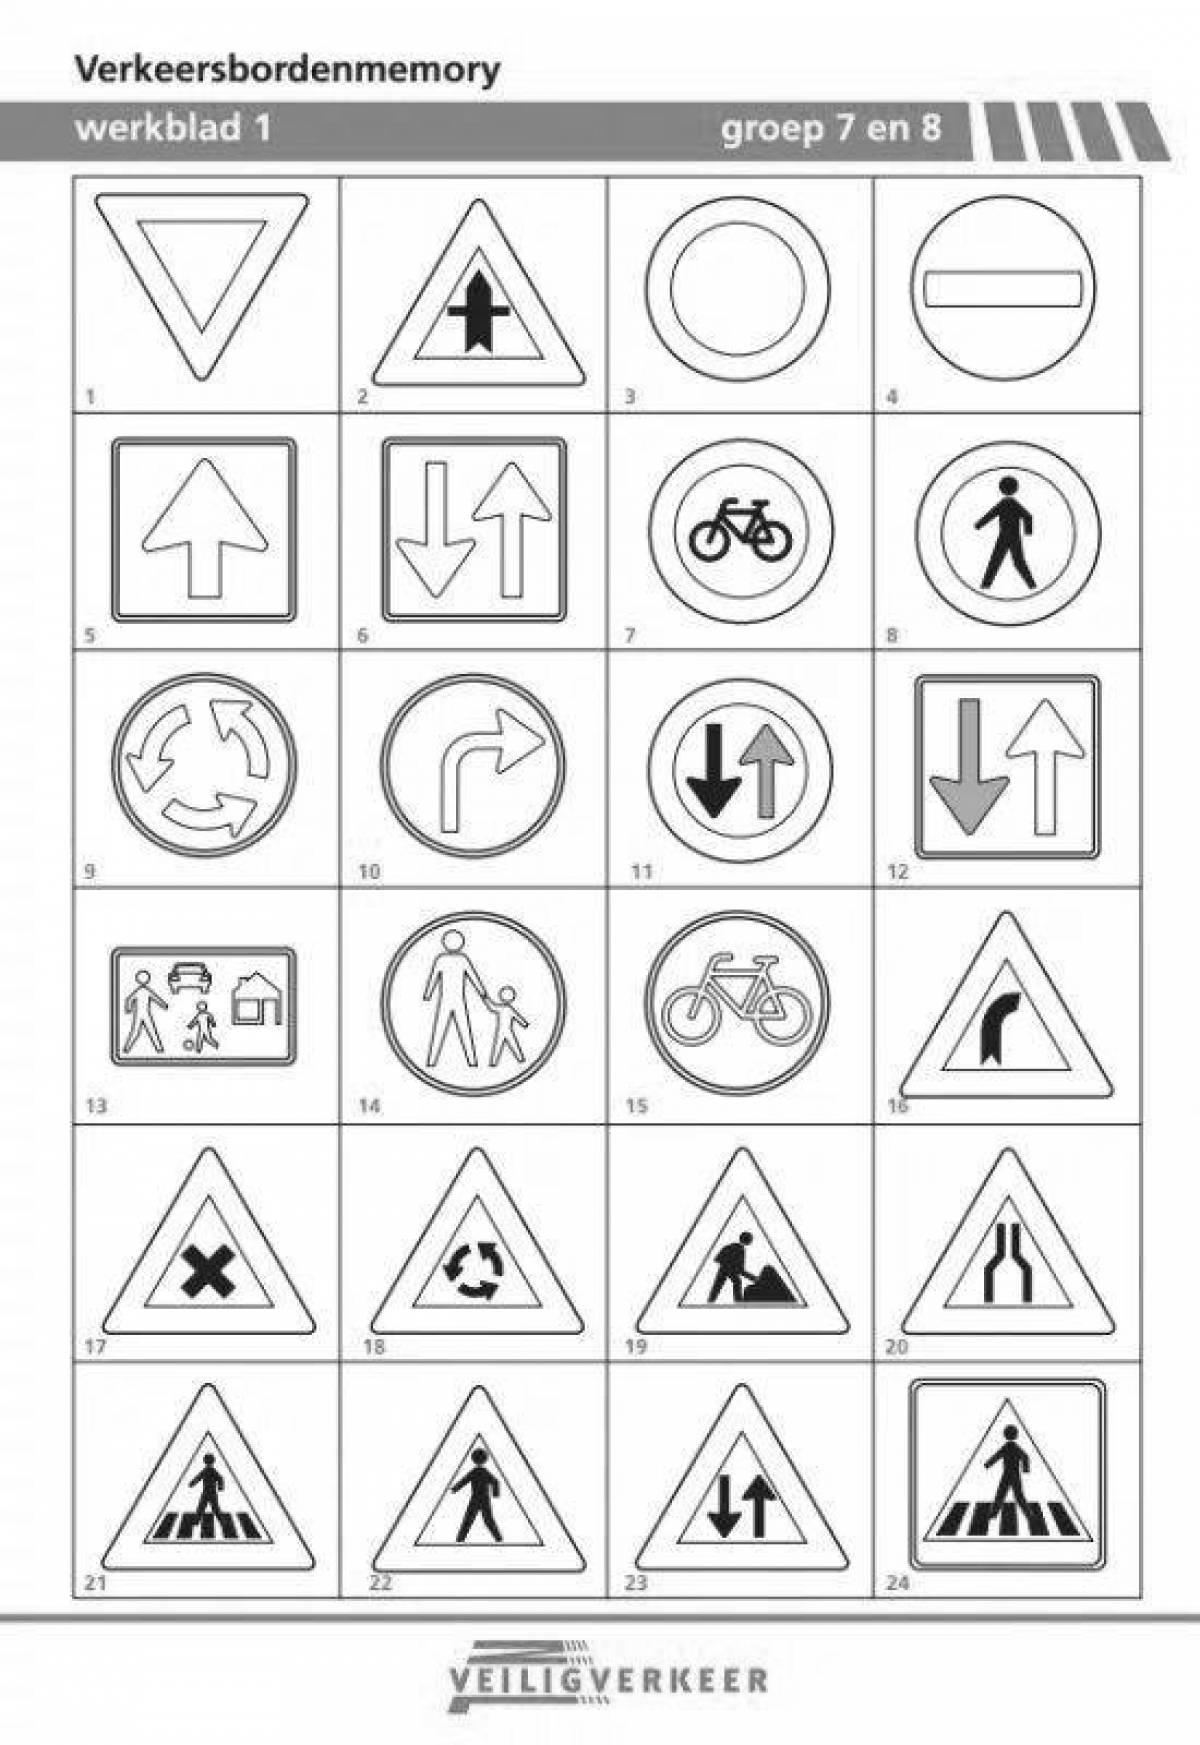 Exquisite road warning signs coloring book